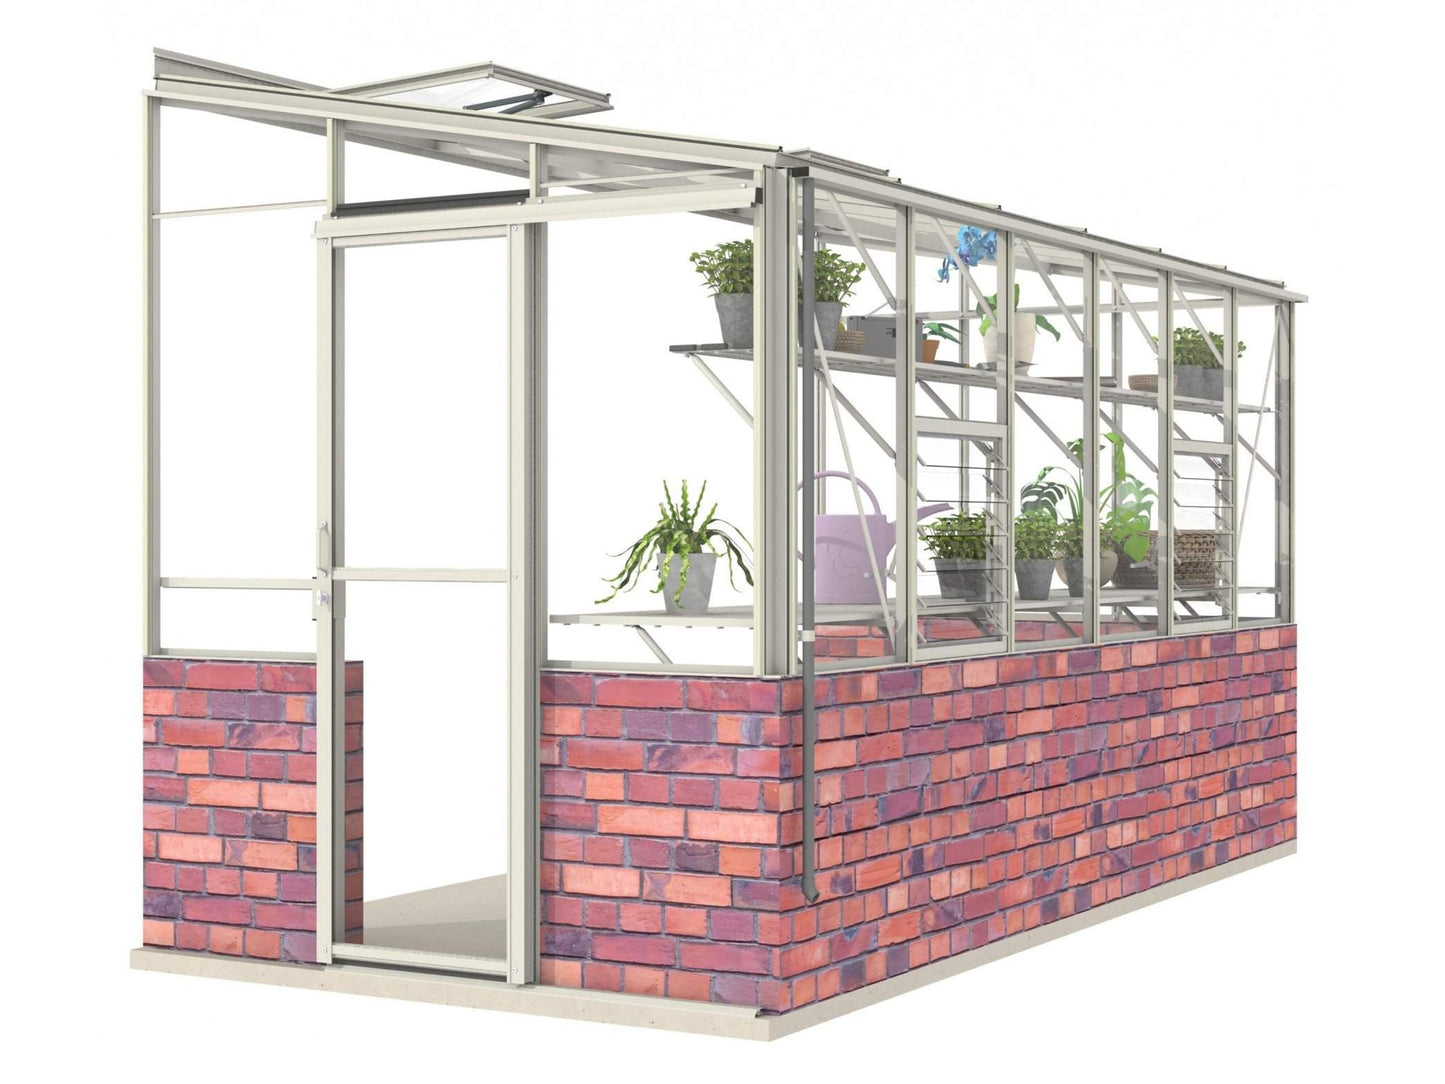 Robinsons 6ft wide LEAN-TO Dwarf Wall